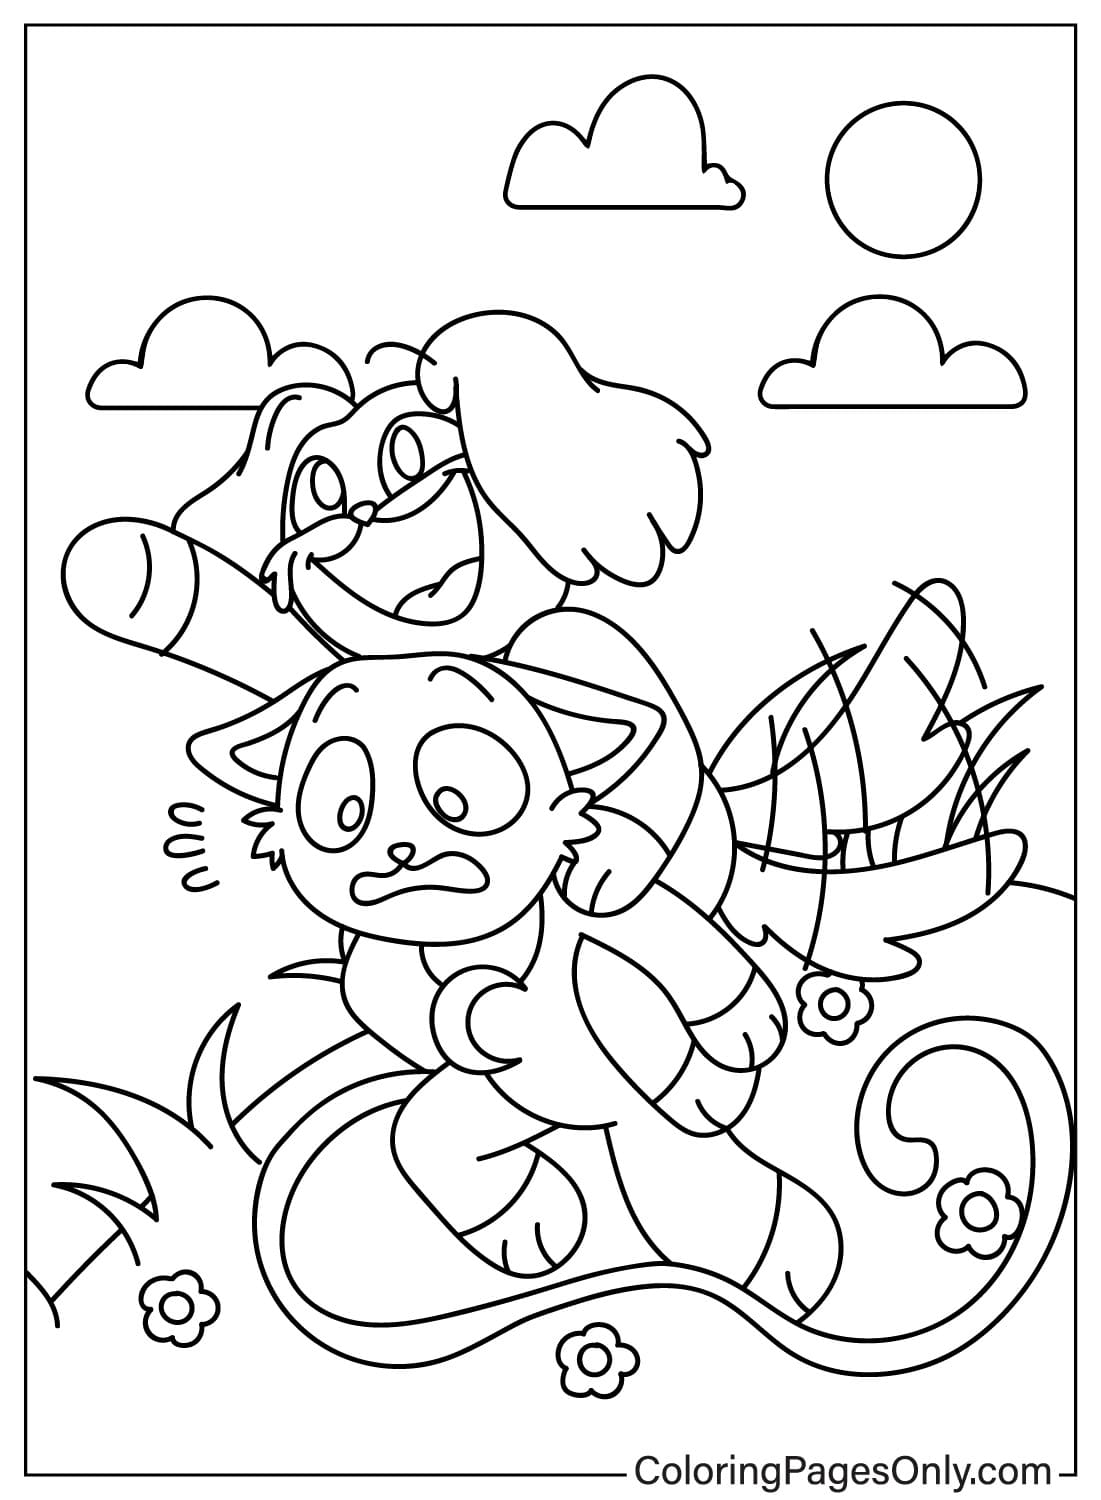 Free CatNap, DogDay Coloring Page from CatNap